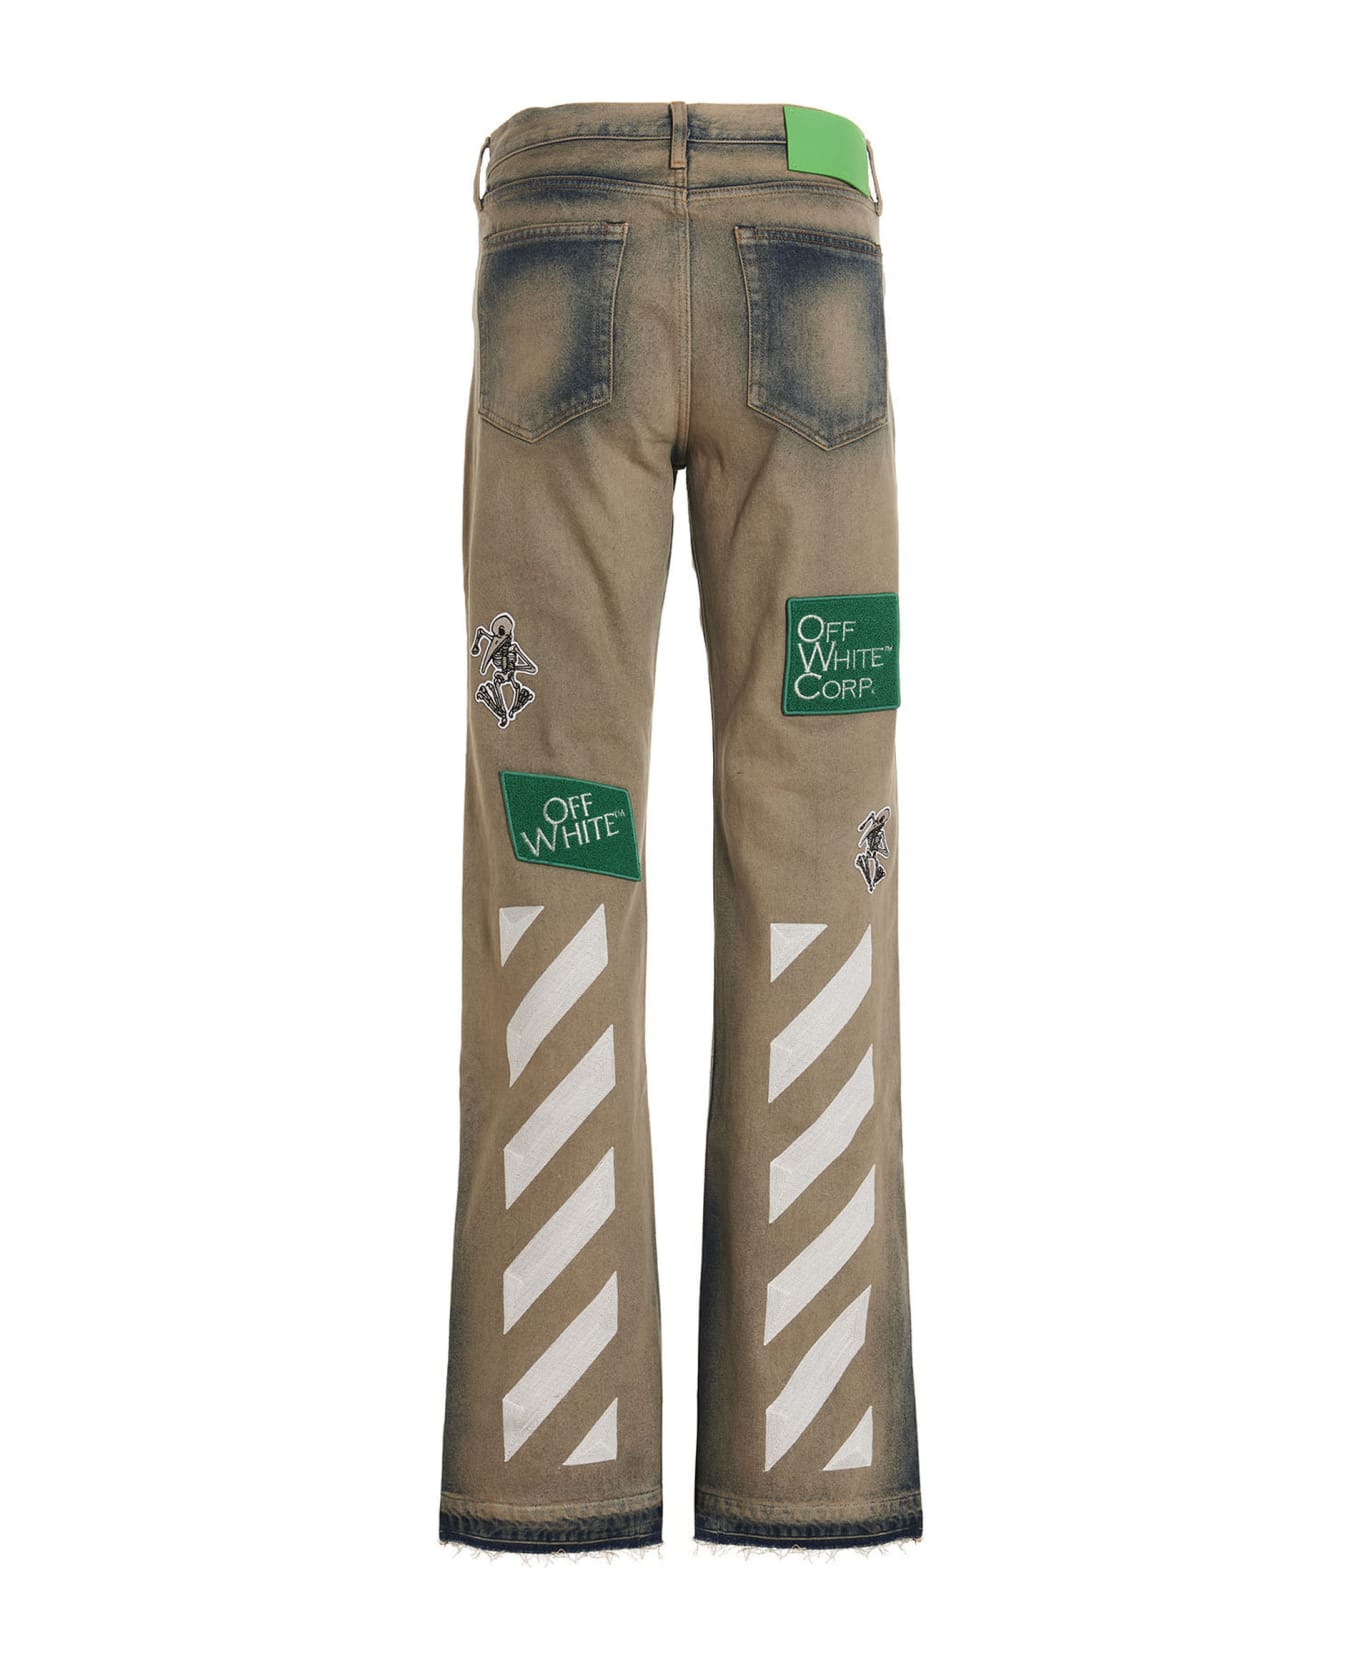 Off-White 'diag' Jeans - Beige